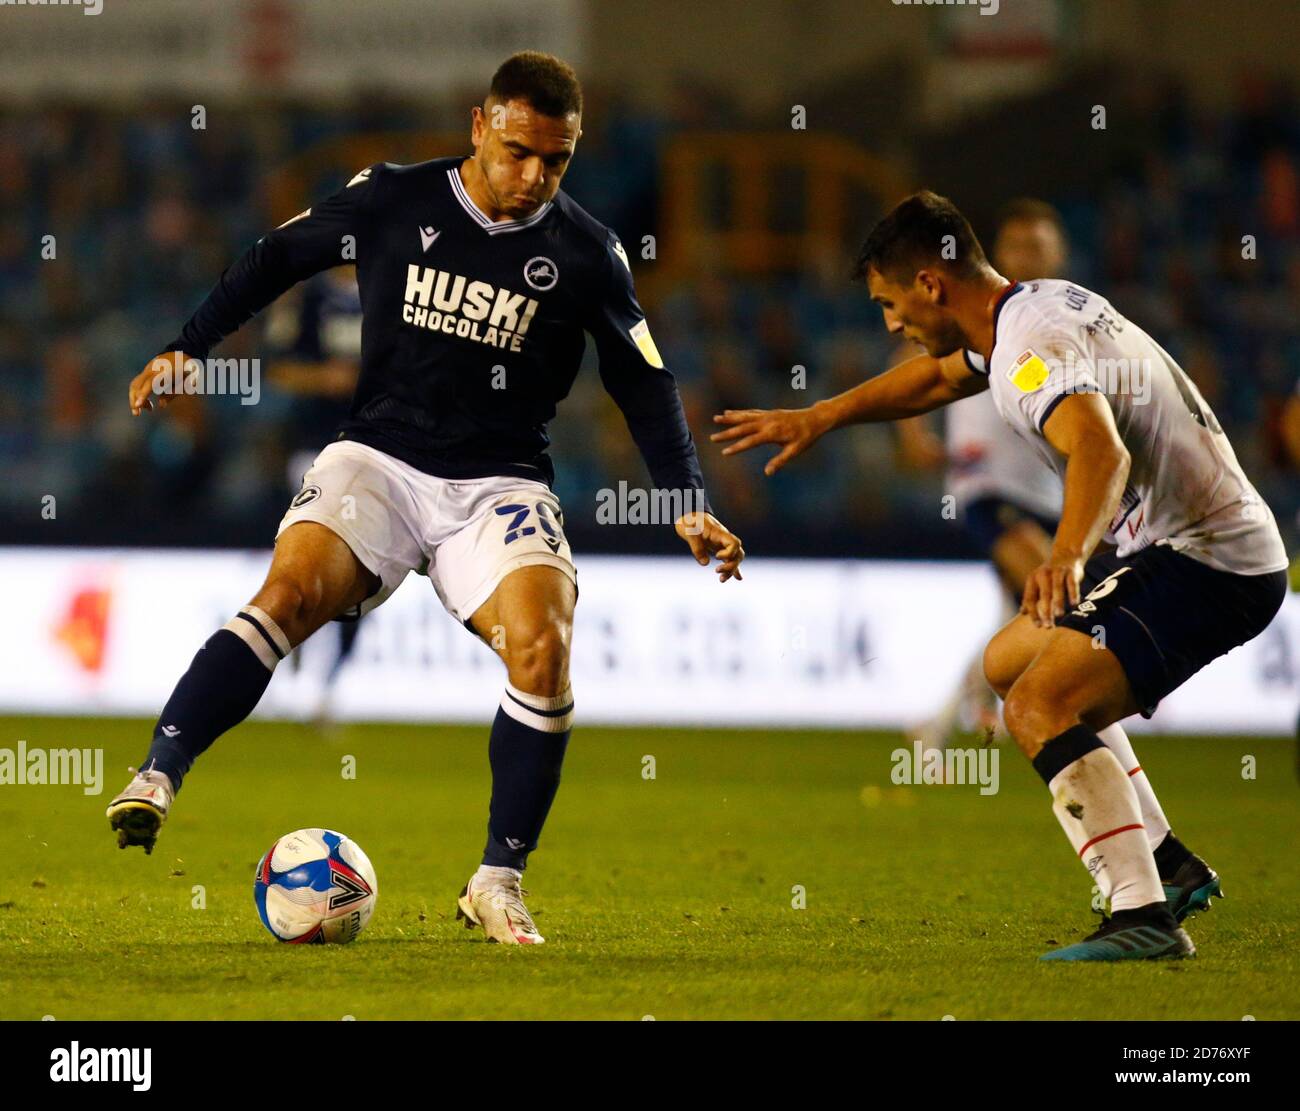 LONDON, United Kingdom, OCTOBER 20: Mason Bennett of Millwall during Sky Bet Championship between Millwall and of Luton Town at The Den Stadium, Londo Stock Photo